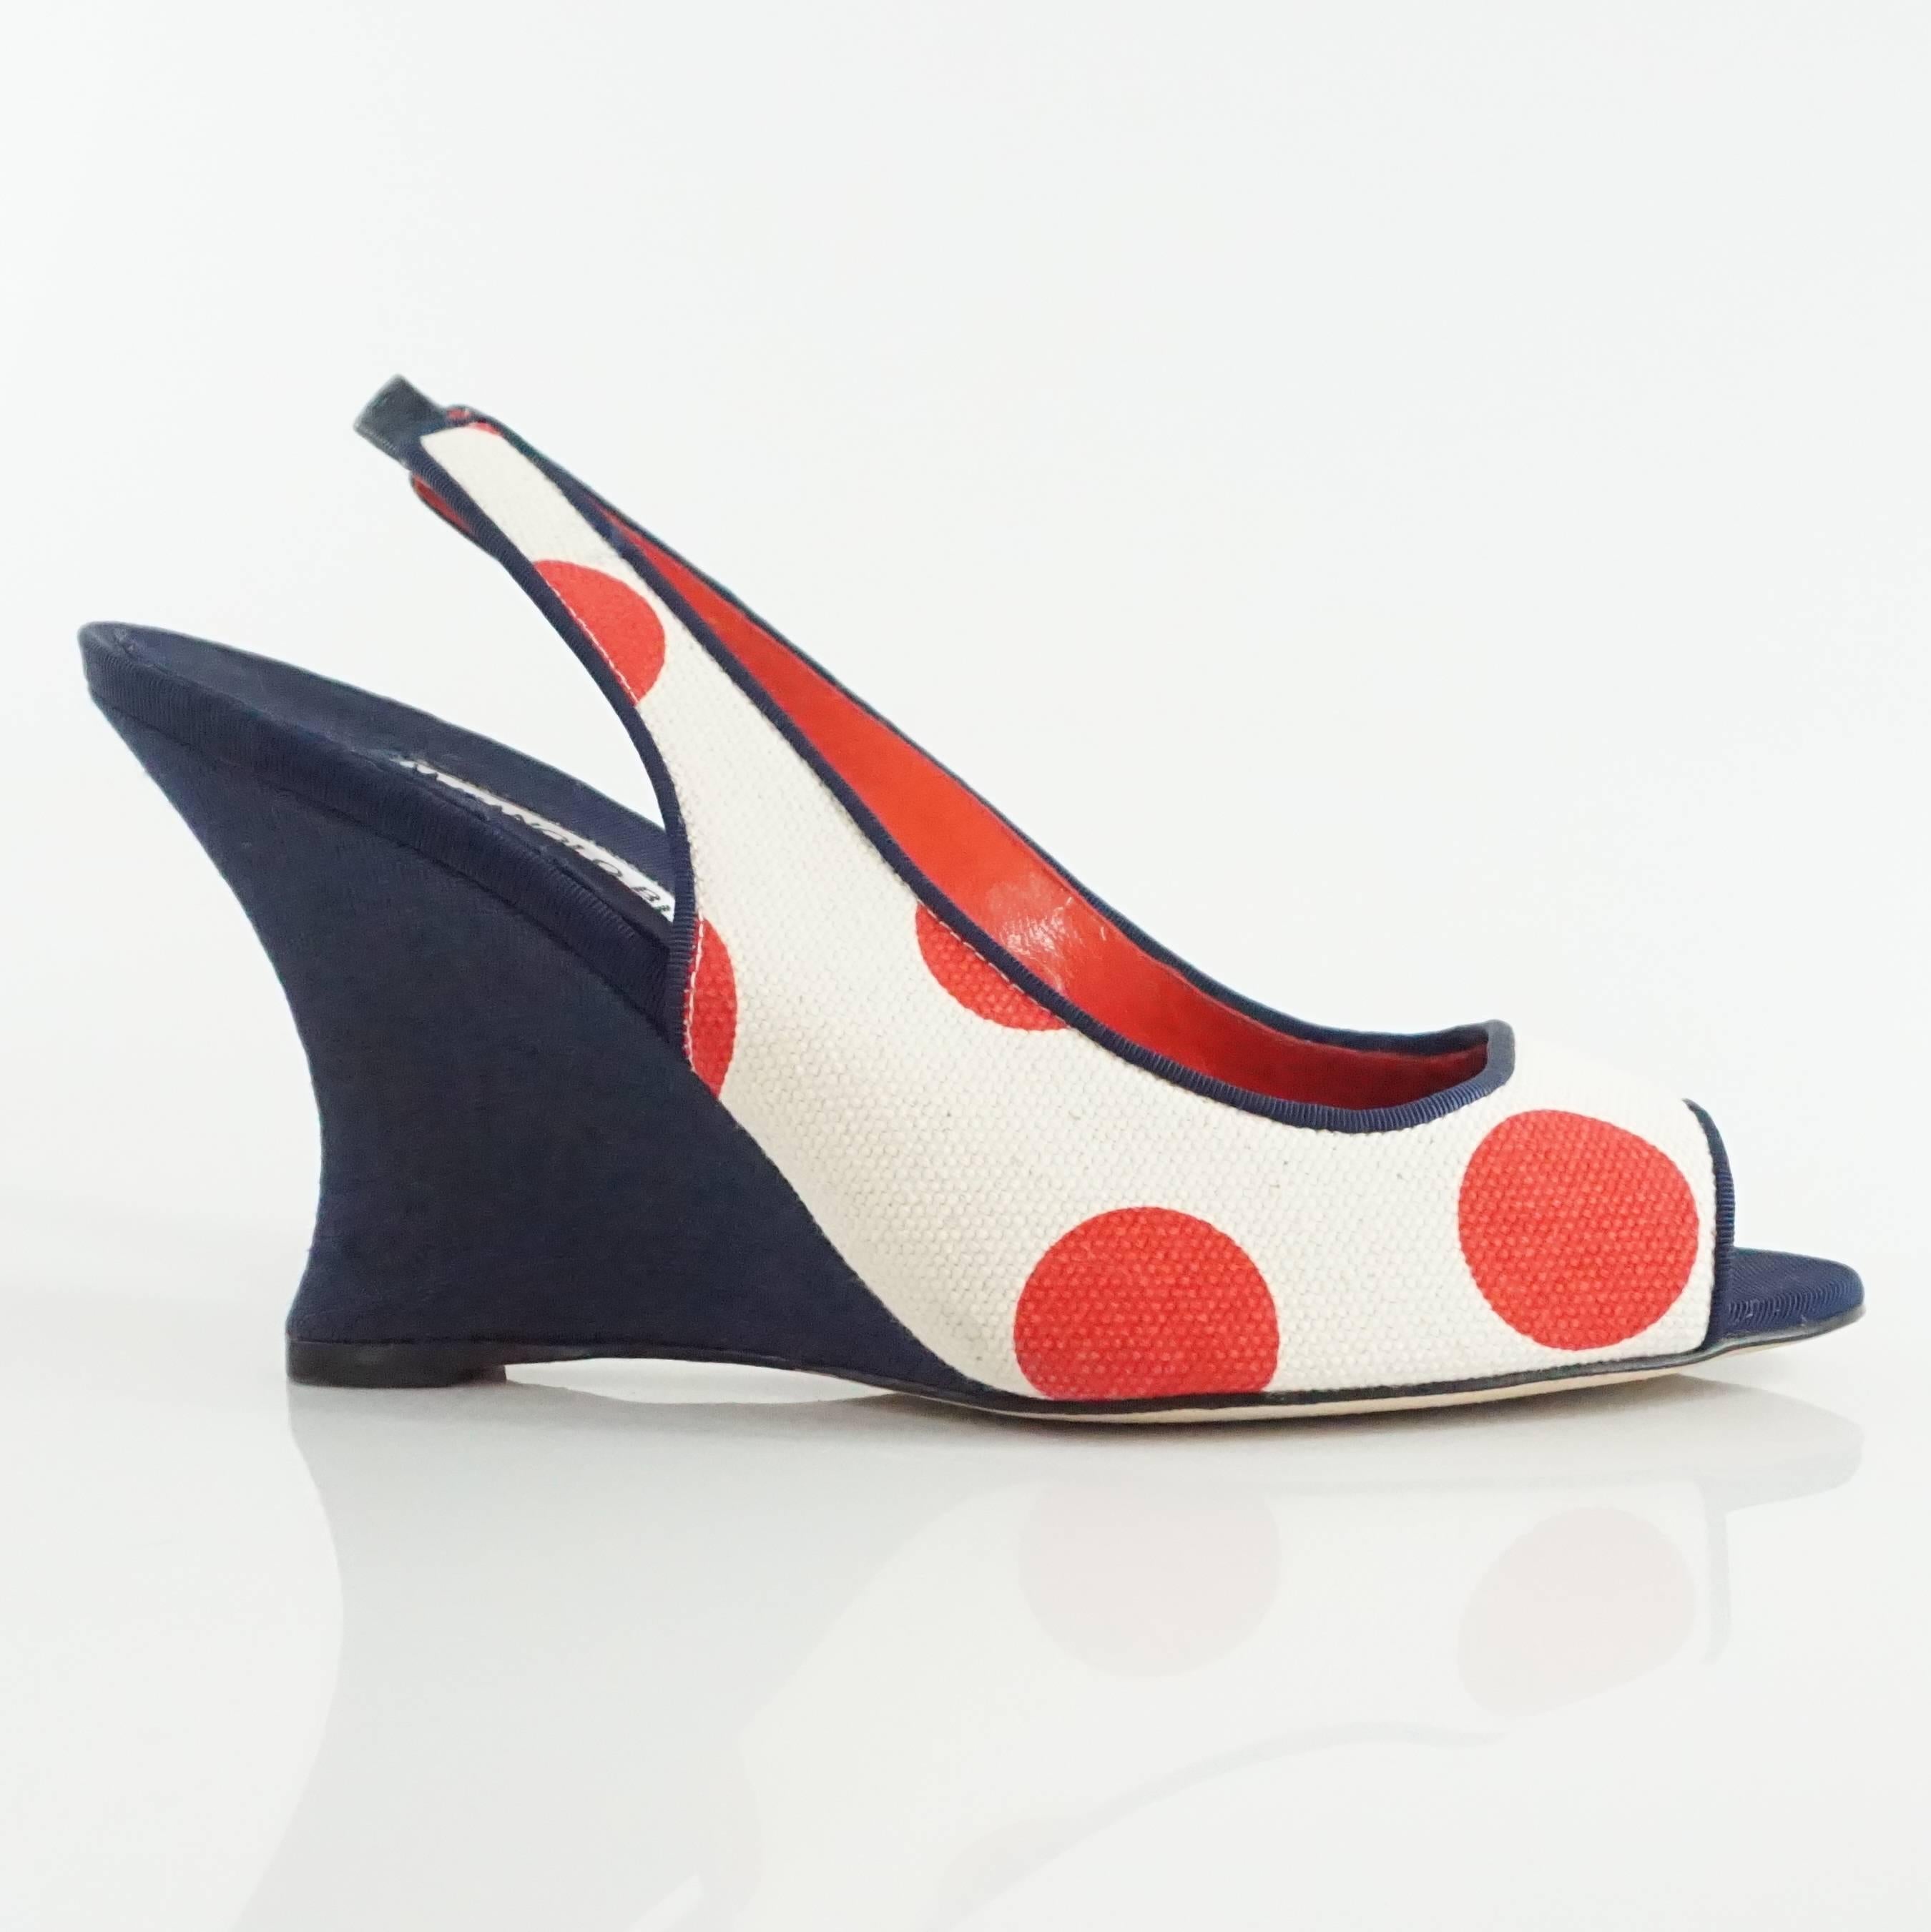 These Manolo Blahnik wedges are navy with a cream top. There are red polka dots and a navy trim. These wedges feature a peep toe and a slingback. They are in very good condition with very minor overall markings.

Measurements
Wedge Height: about